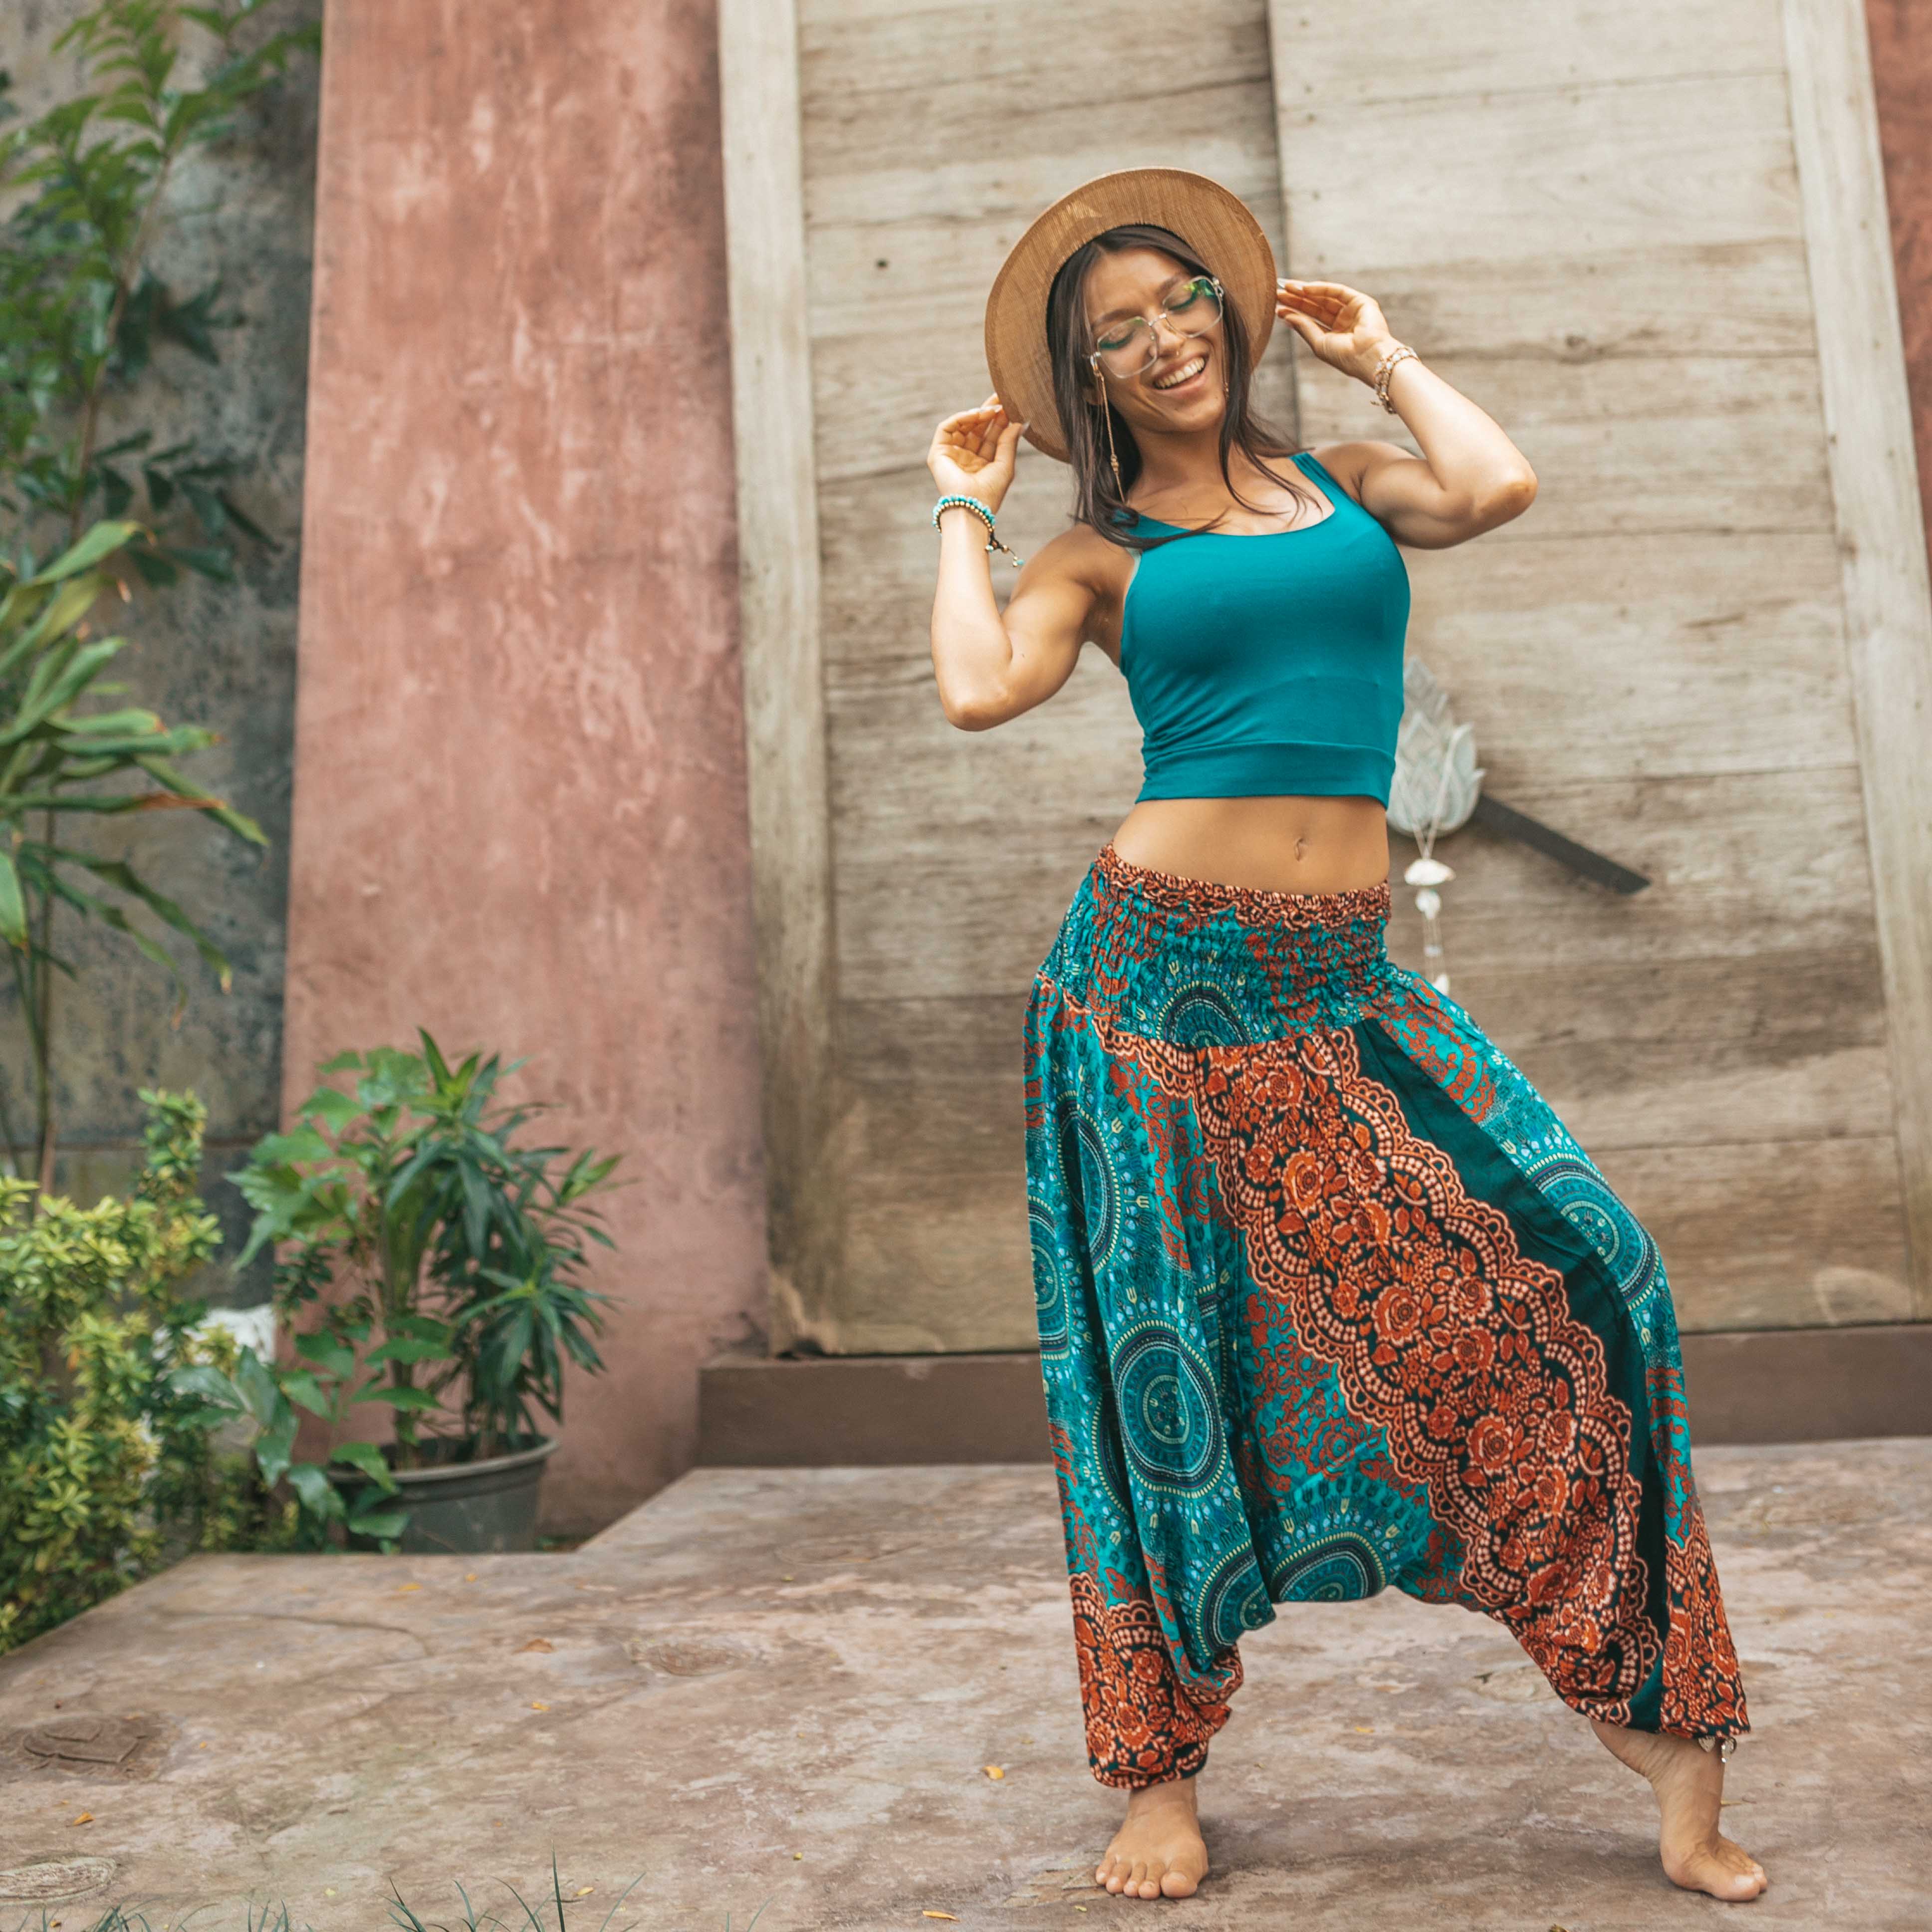 Hippie Pants - Buy Today Elephant Pants Jewelry And Bohemian Clothes Handmade In Thailand Help To Save The Elephants FairTrade And Vegan